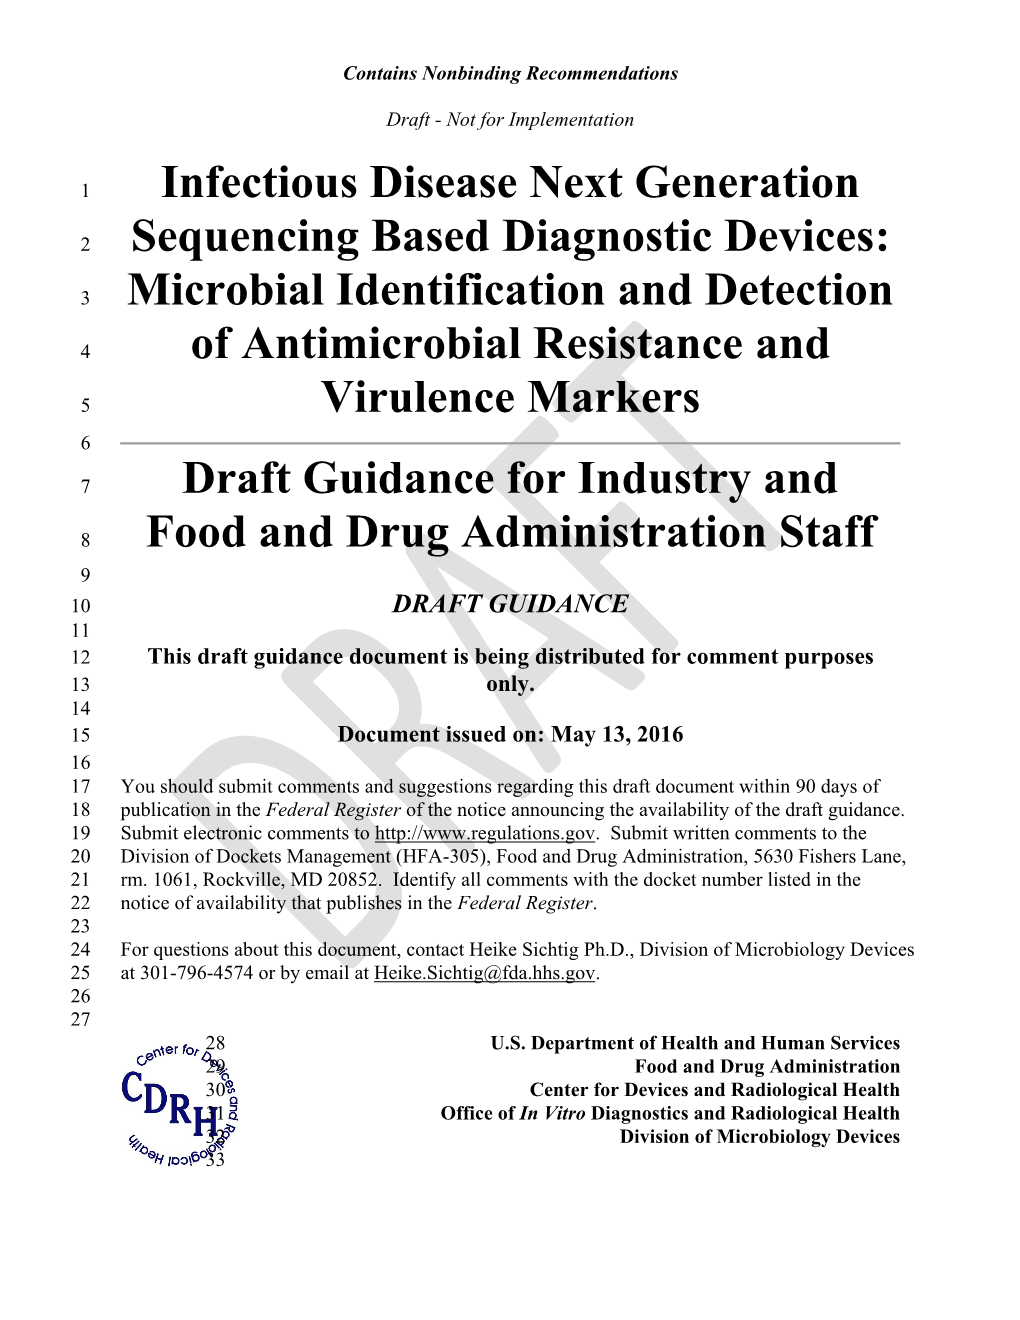 Infectious Disease Next Generation Sequencing Based Diagnostic Devices: Microbial Identification and Detection of Antimicrobial